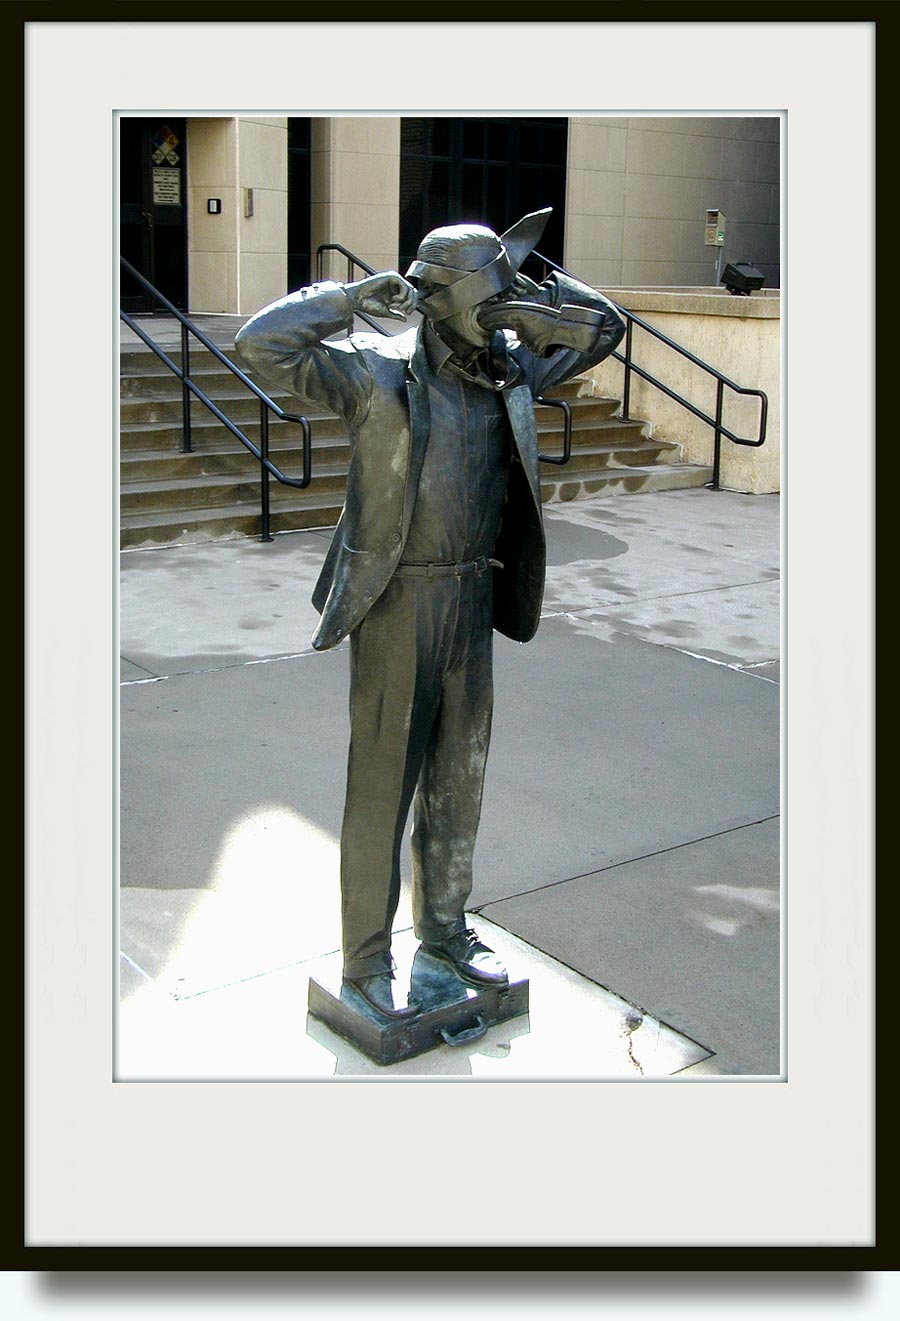 Terry Allen (b. 1943  in Wichita, Kansas). Modern Communication. 1995. Bronze. Commissioned by the Municipal Art Commision’s One-Percent-For-Art Program of Kansas City. Located 1111 Locust Street, New Communication Plaza (outside the Kansas City Police Department communications building),  in Downtown, Kansas City, Missouri, US. http://www.flickr.com/photos/chimphappyhour/1186411804/